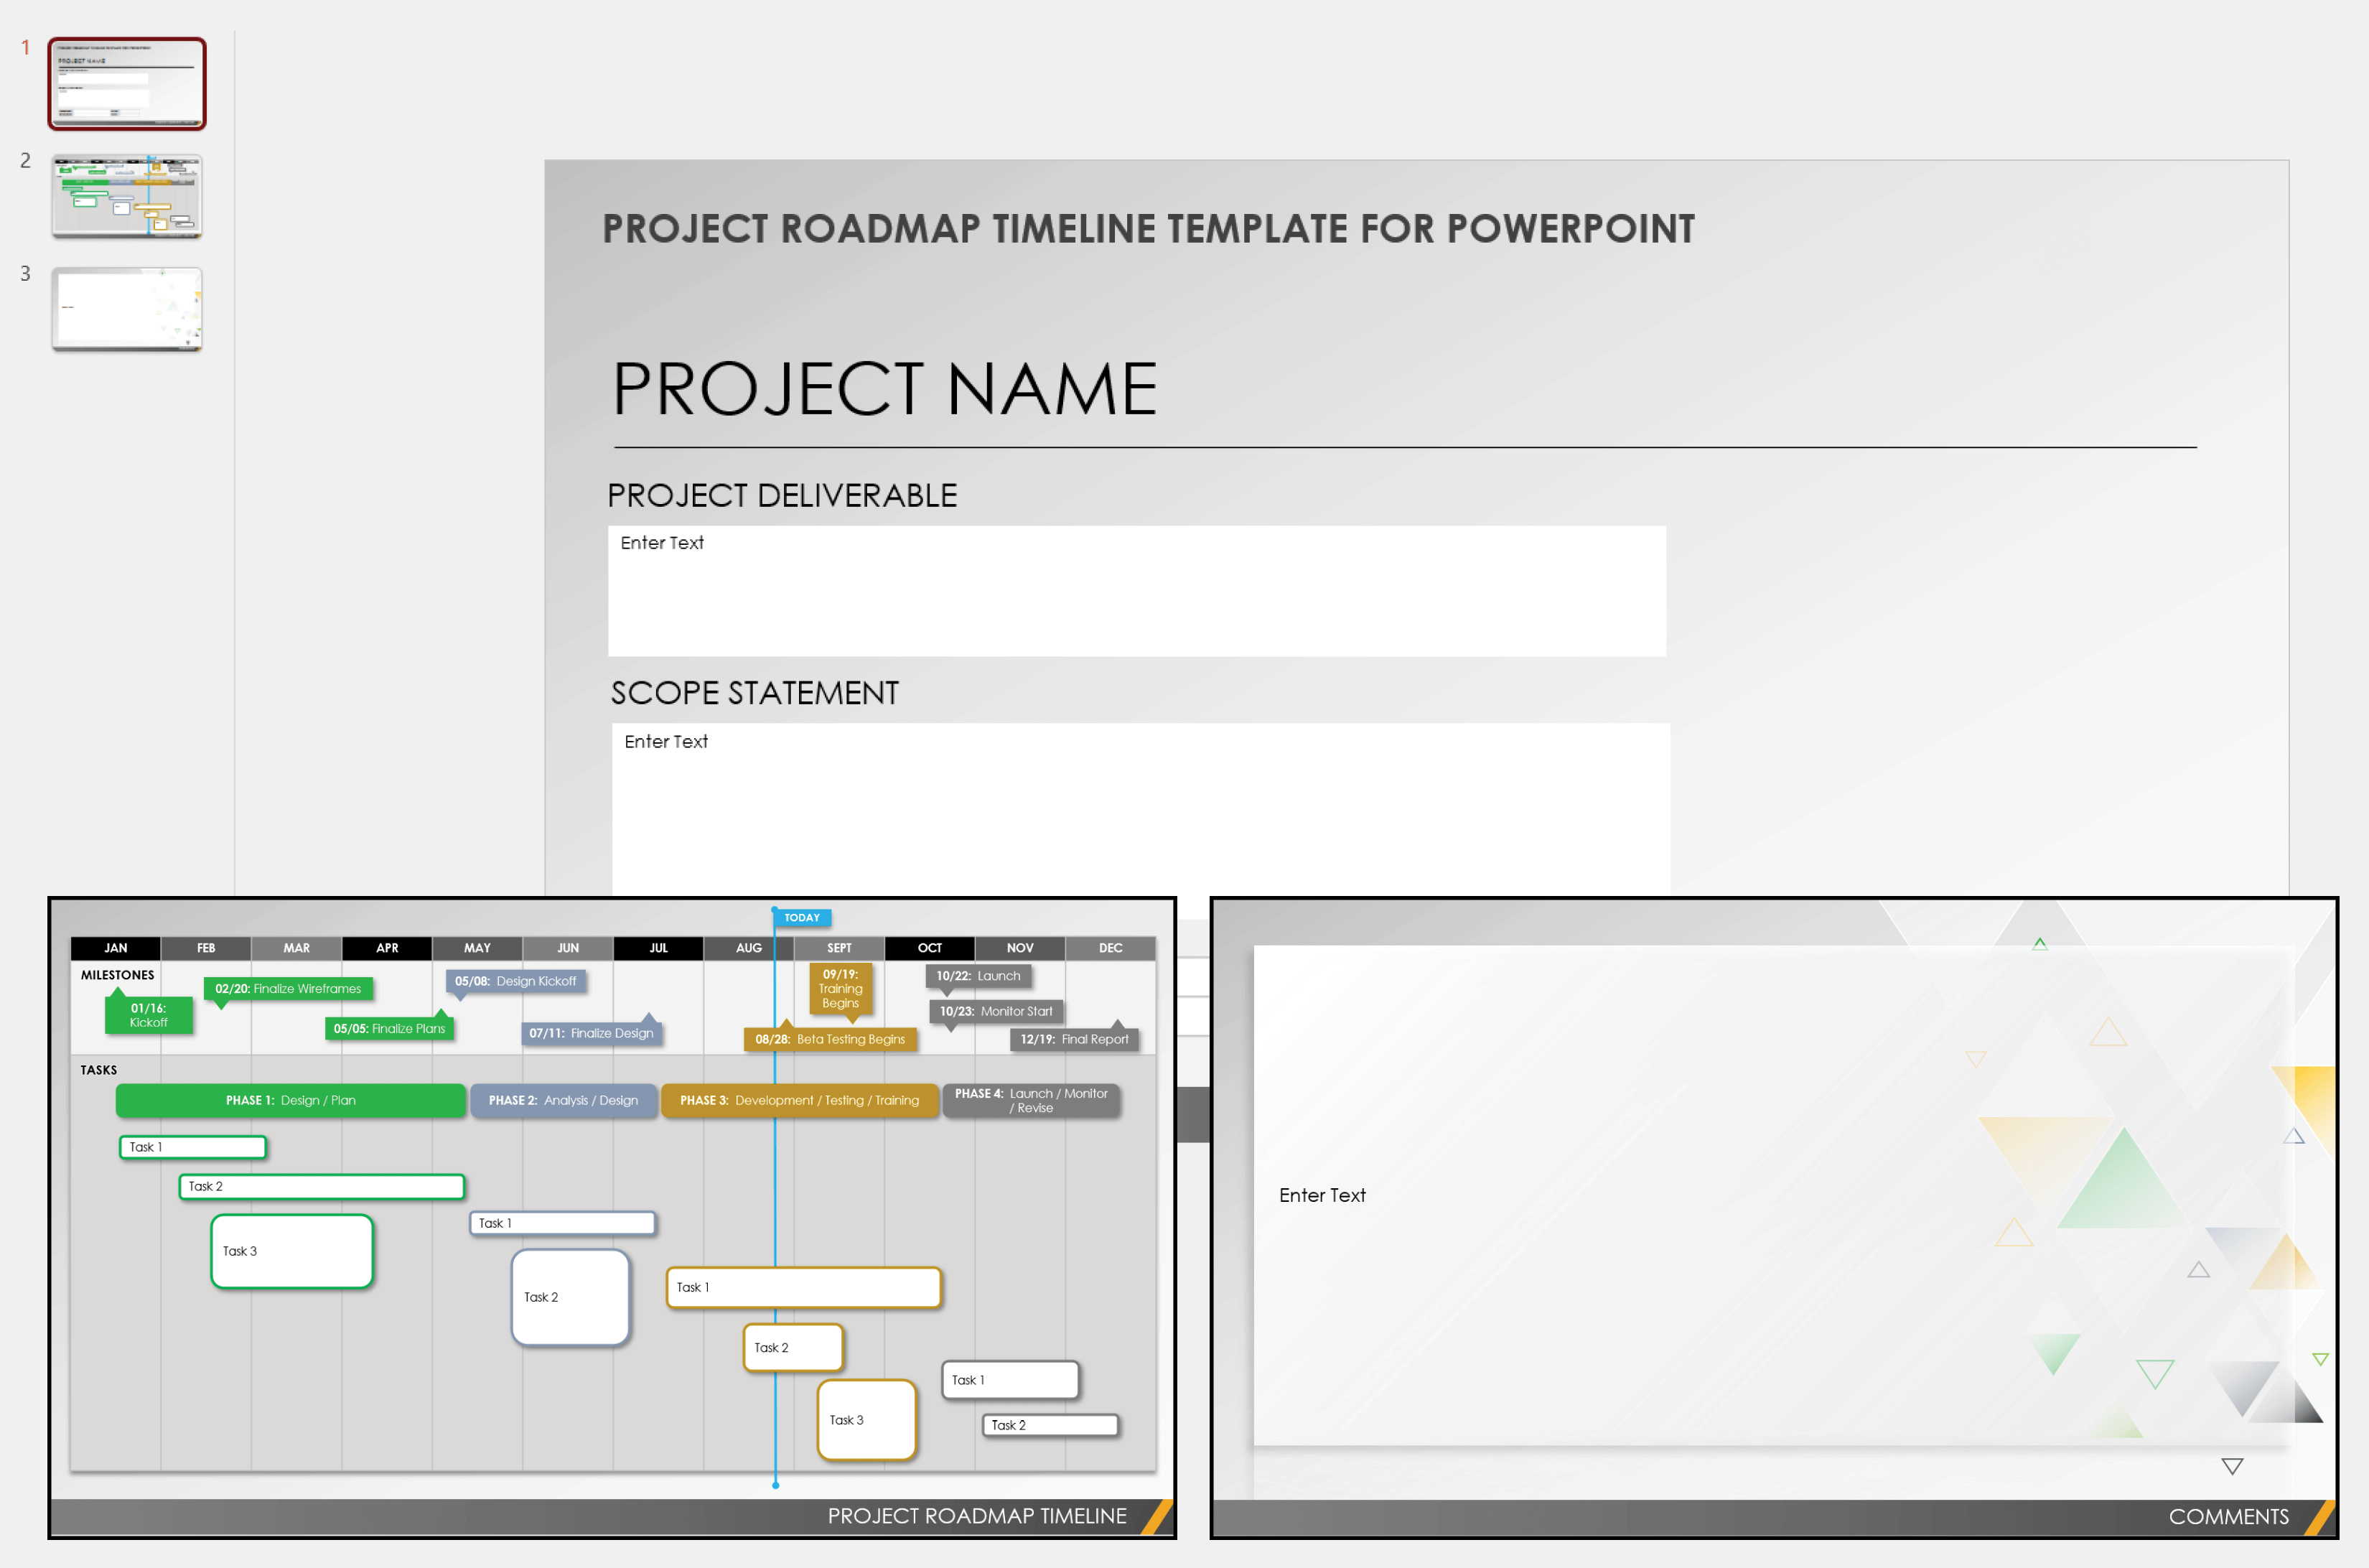 Project Roadmap Timeline Template for PowerPoint